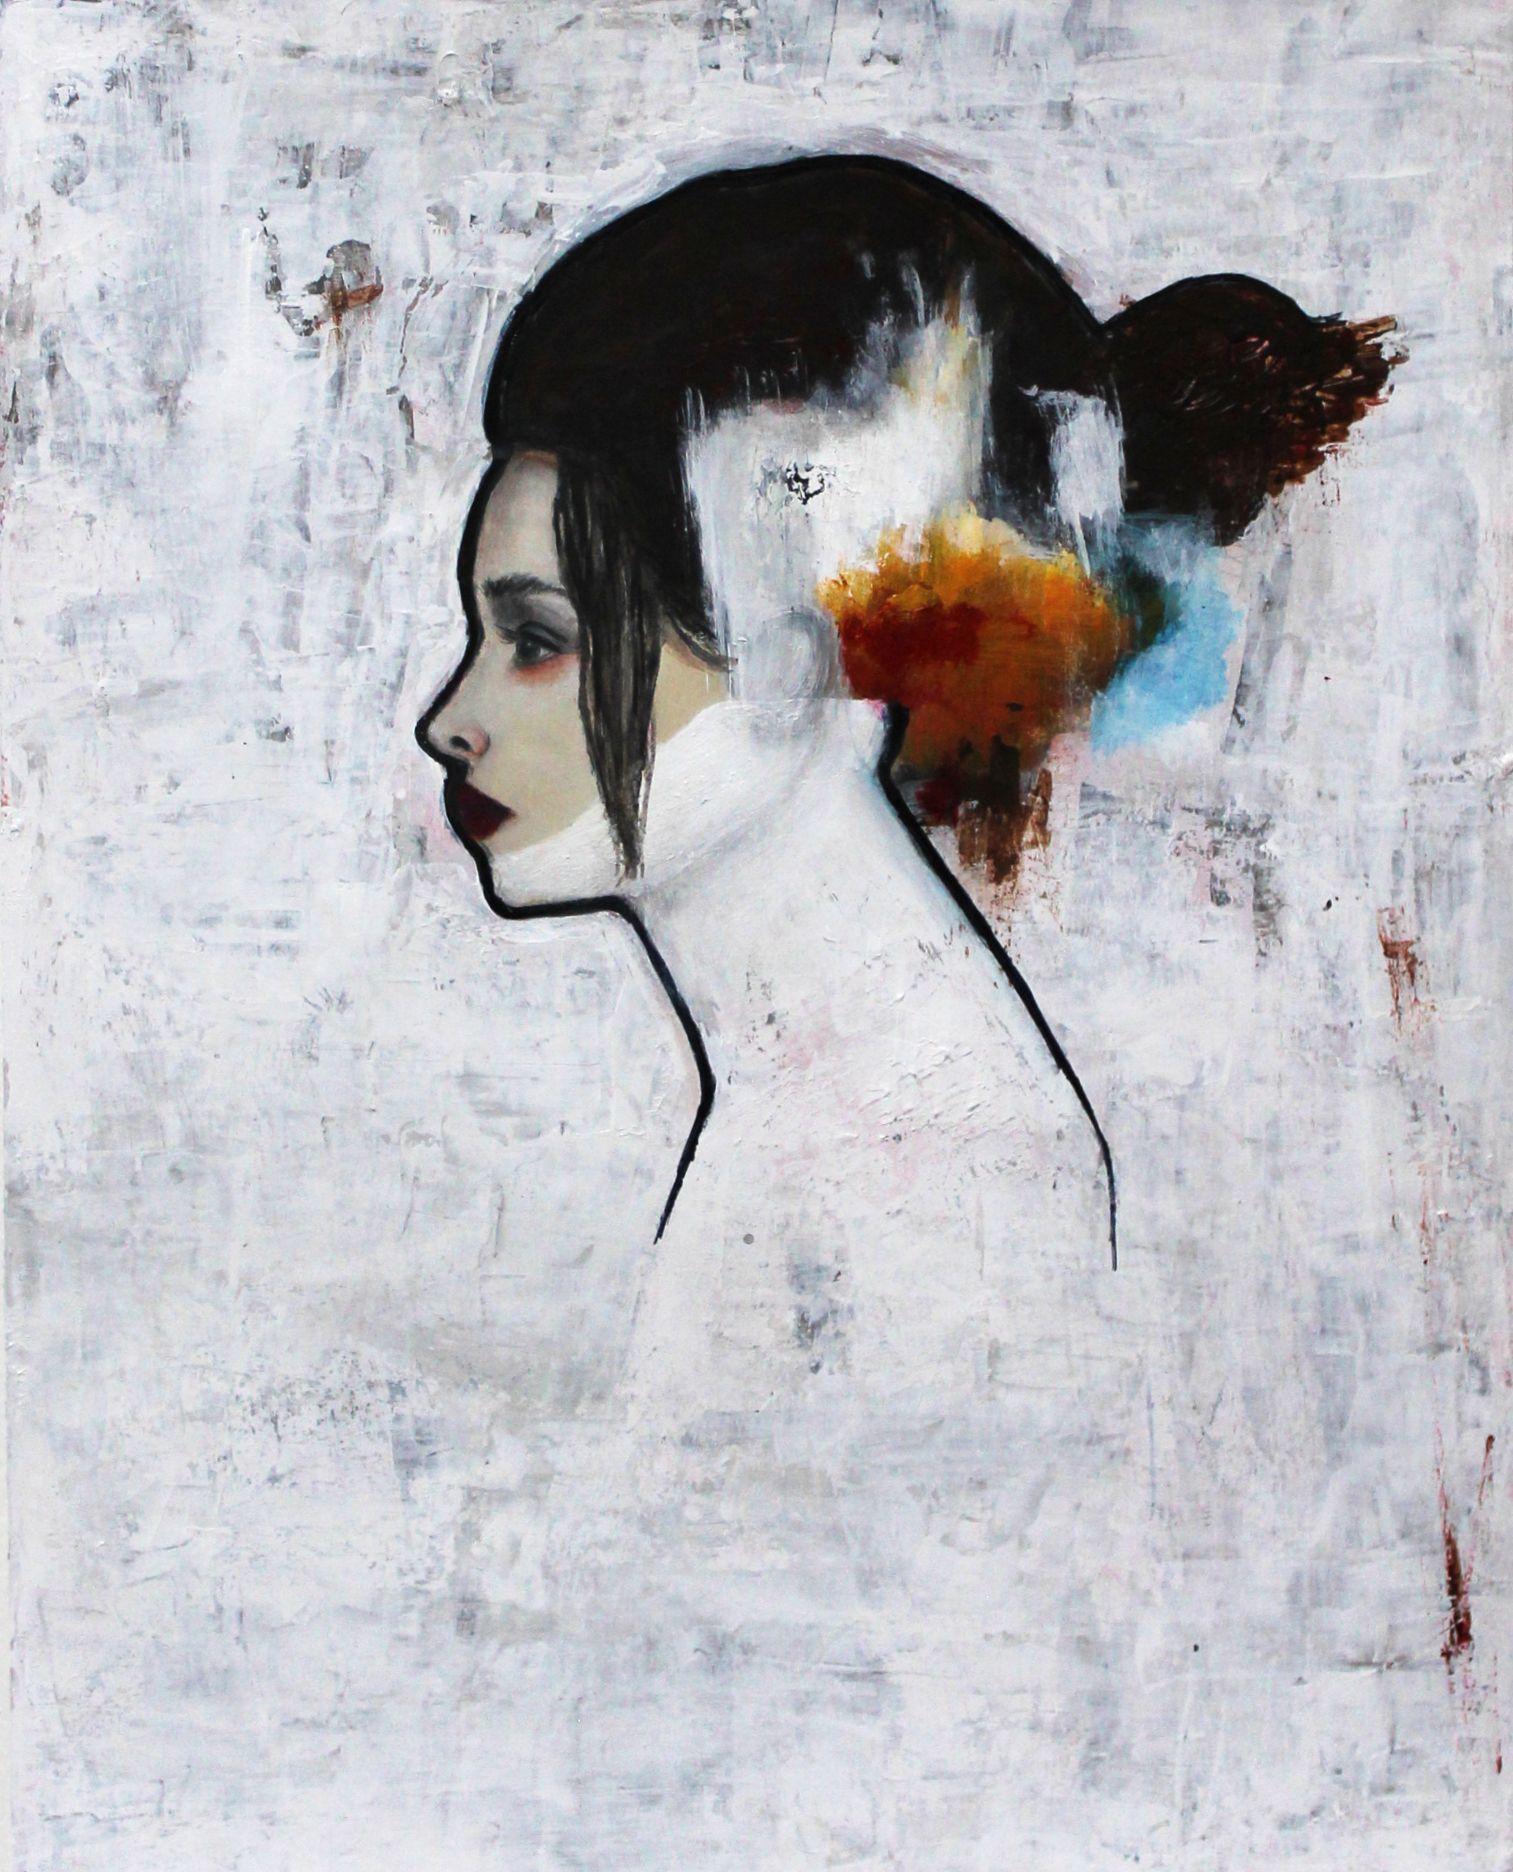 Her No.32, Mixed Media on Paper - Mixed Media Art by Haydee Torres